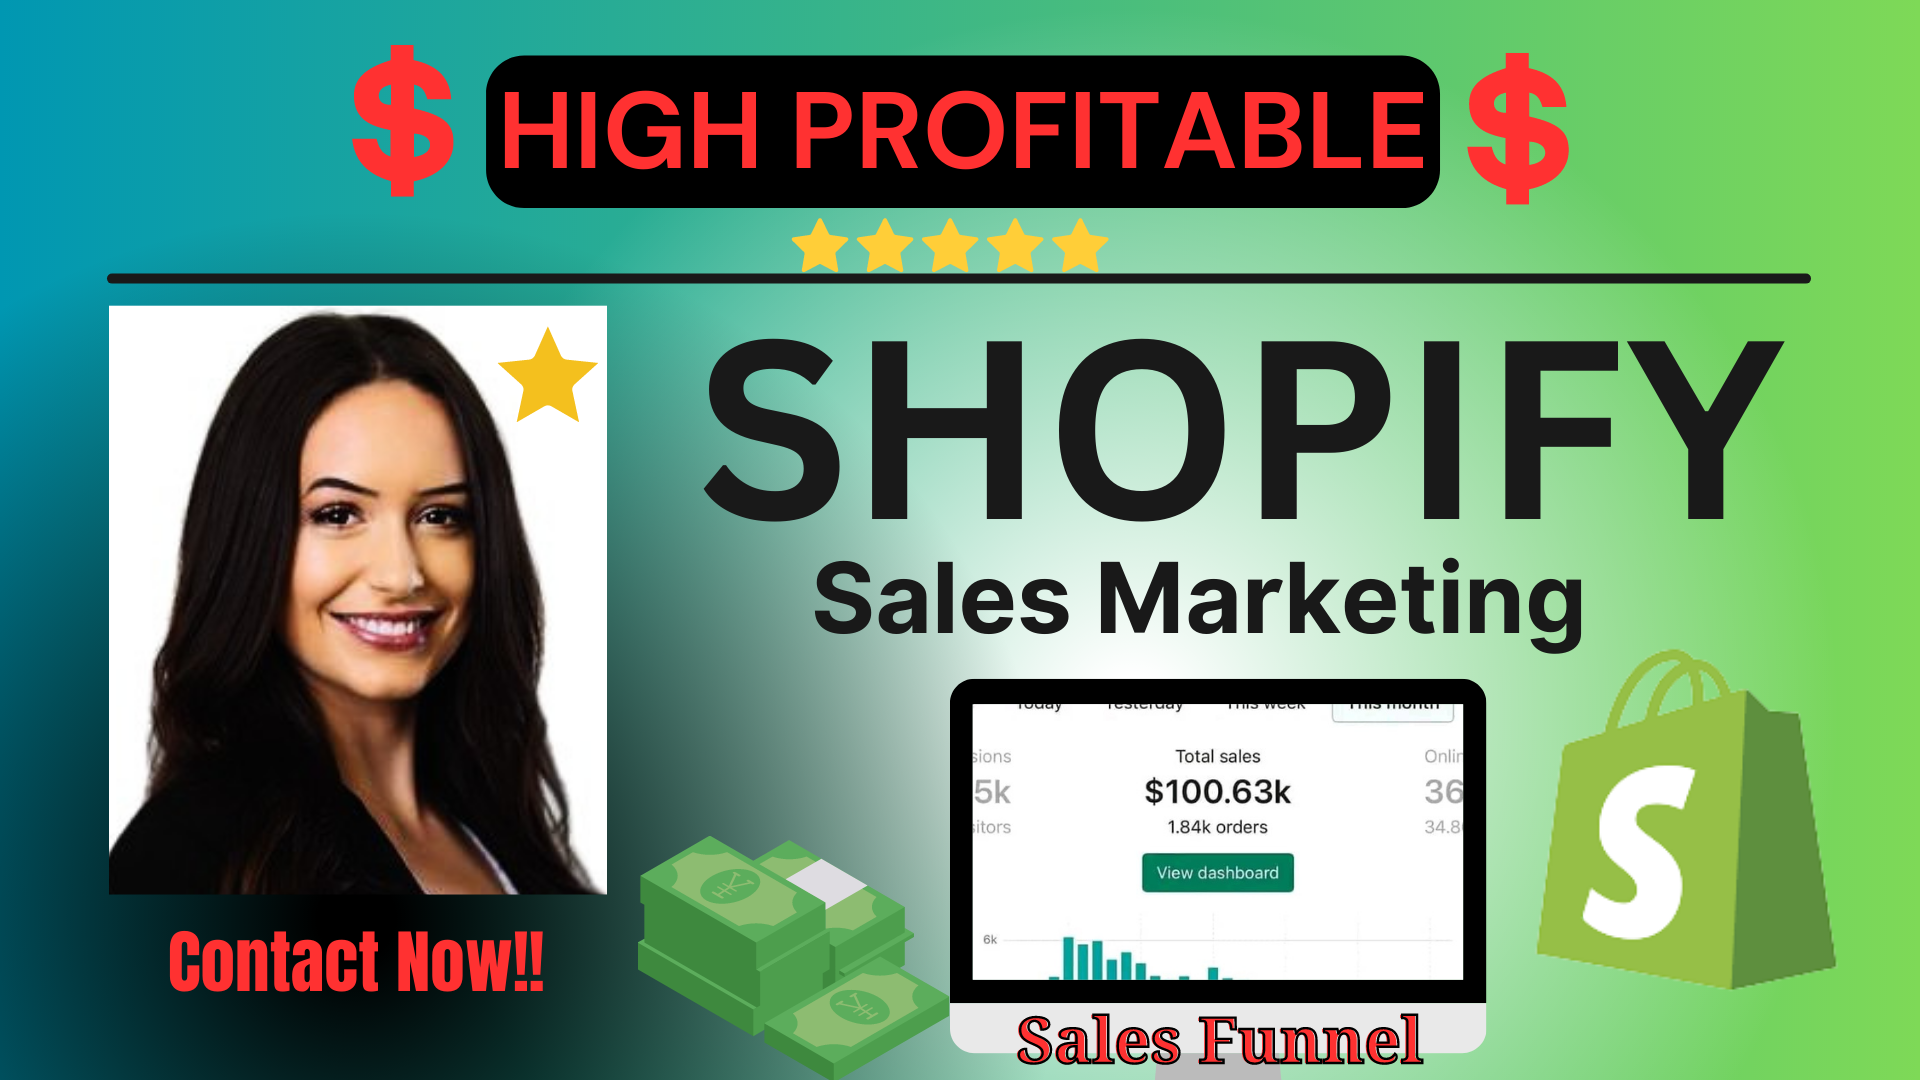 170252I will promote shopify store with shopify marketing sales funnel to boost sales